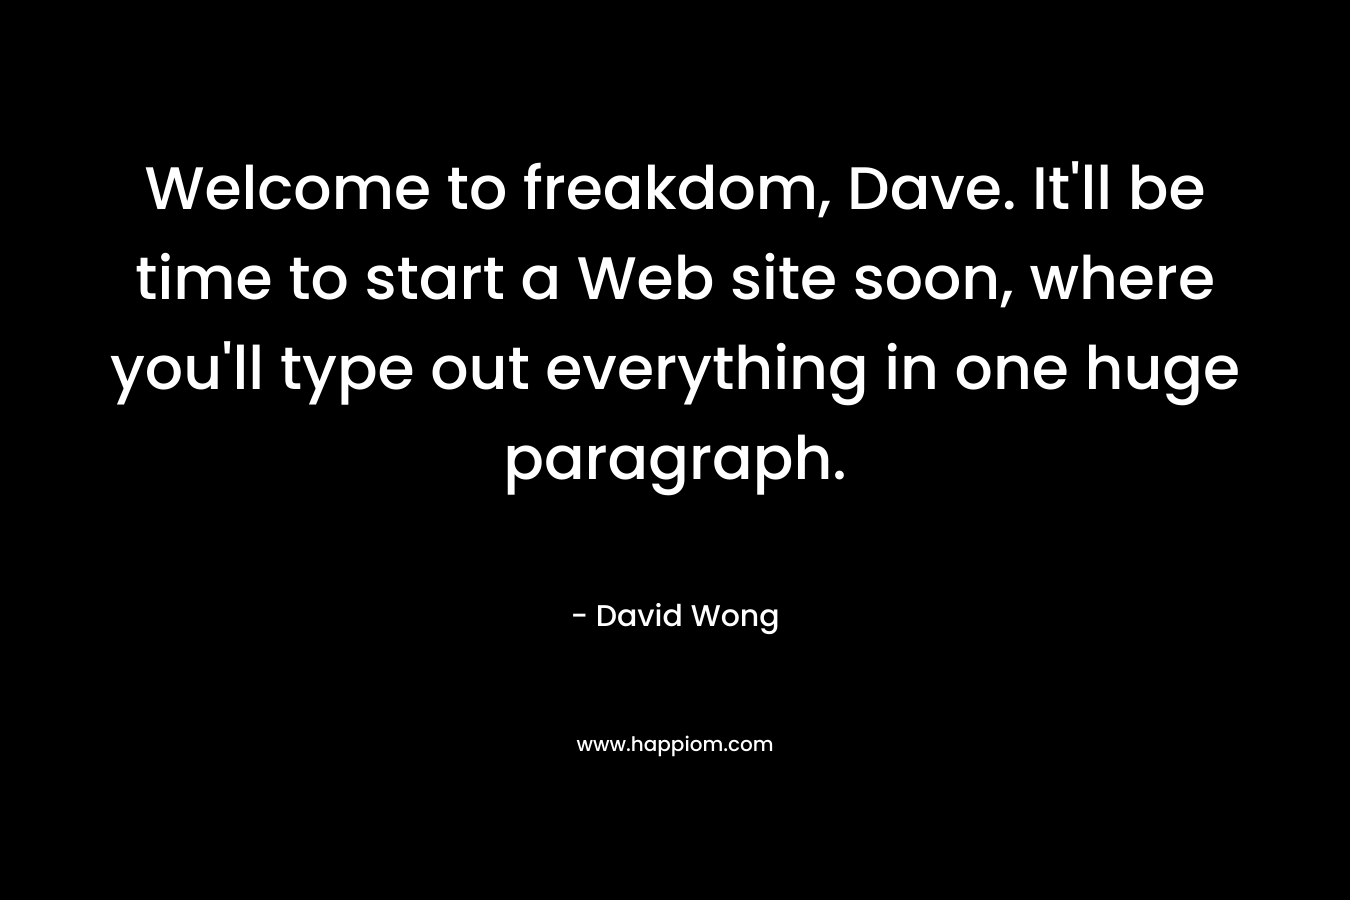 Welcome to freakdom, Dave. It’ll be time to start a Web site soon, where you’ll type out everything in one huge paragraph. – David Wong